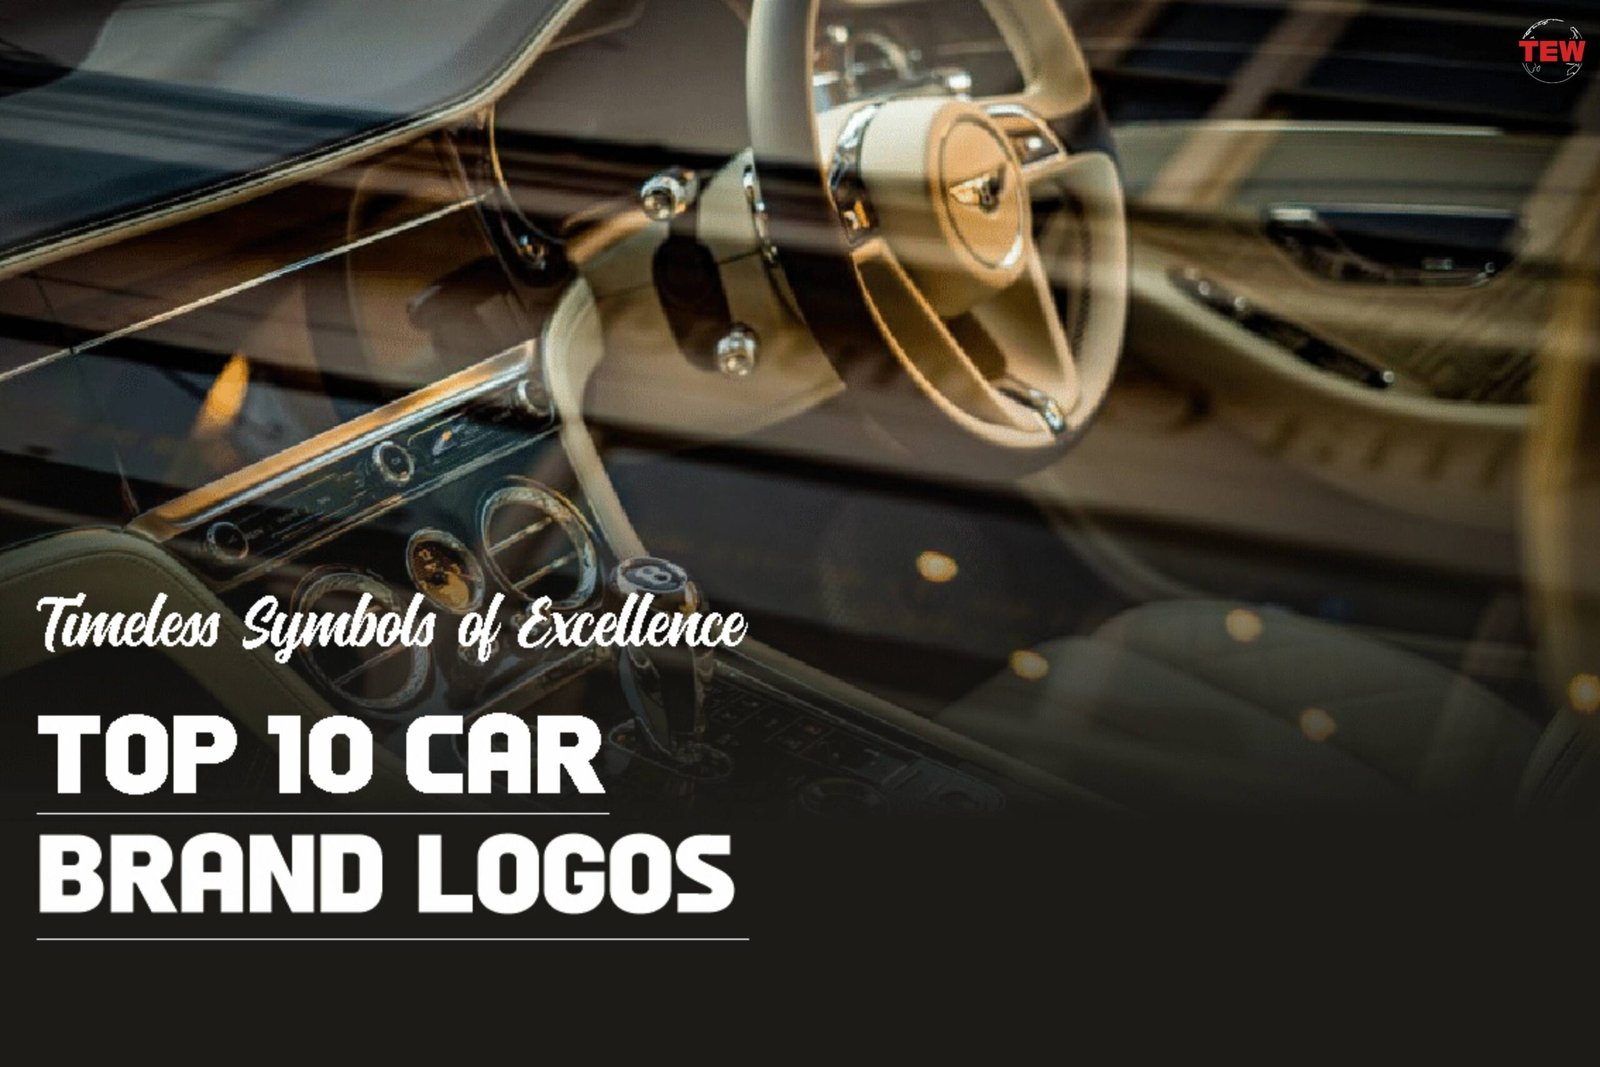 Timeless Symbols of Excellence: Top 10 Car Brand Logos